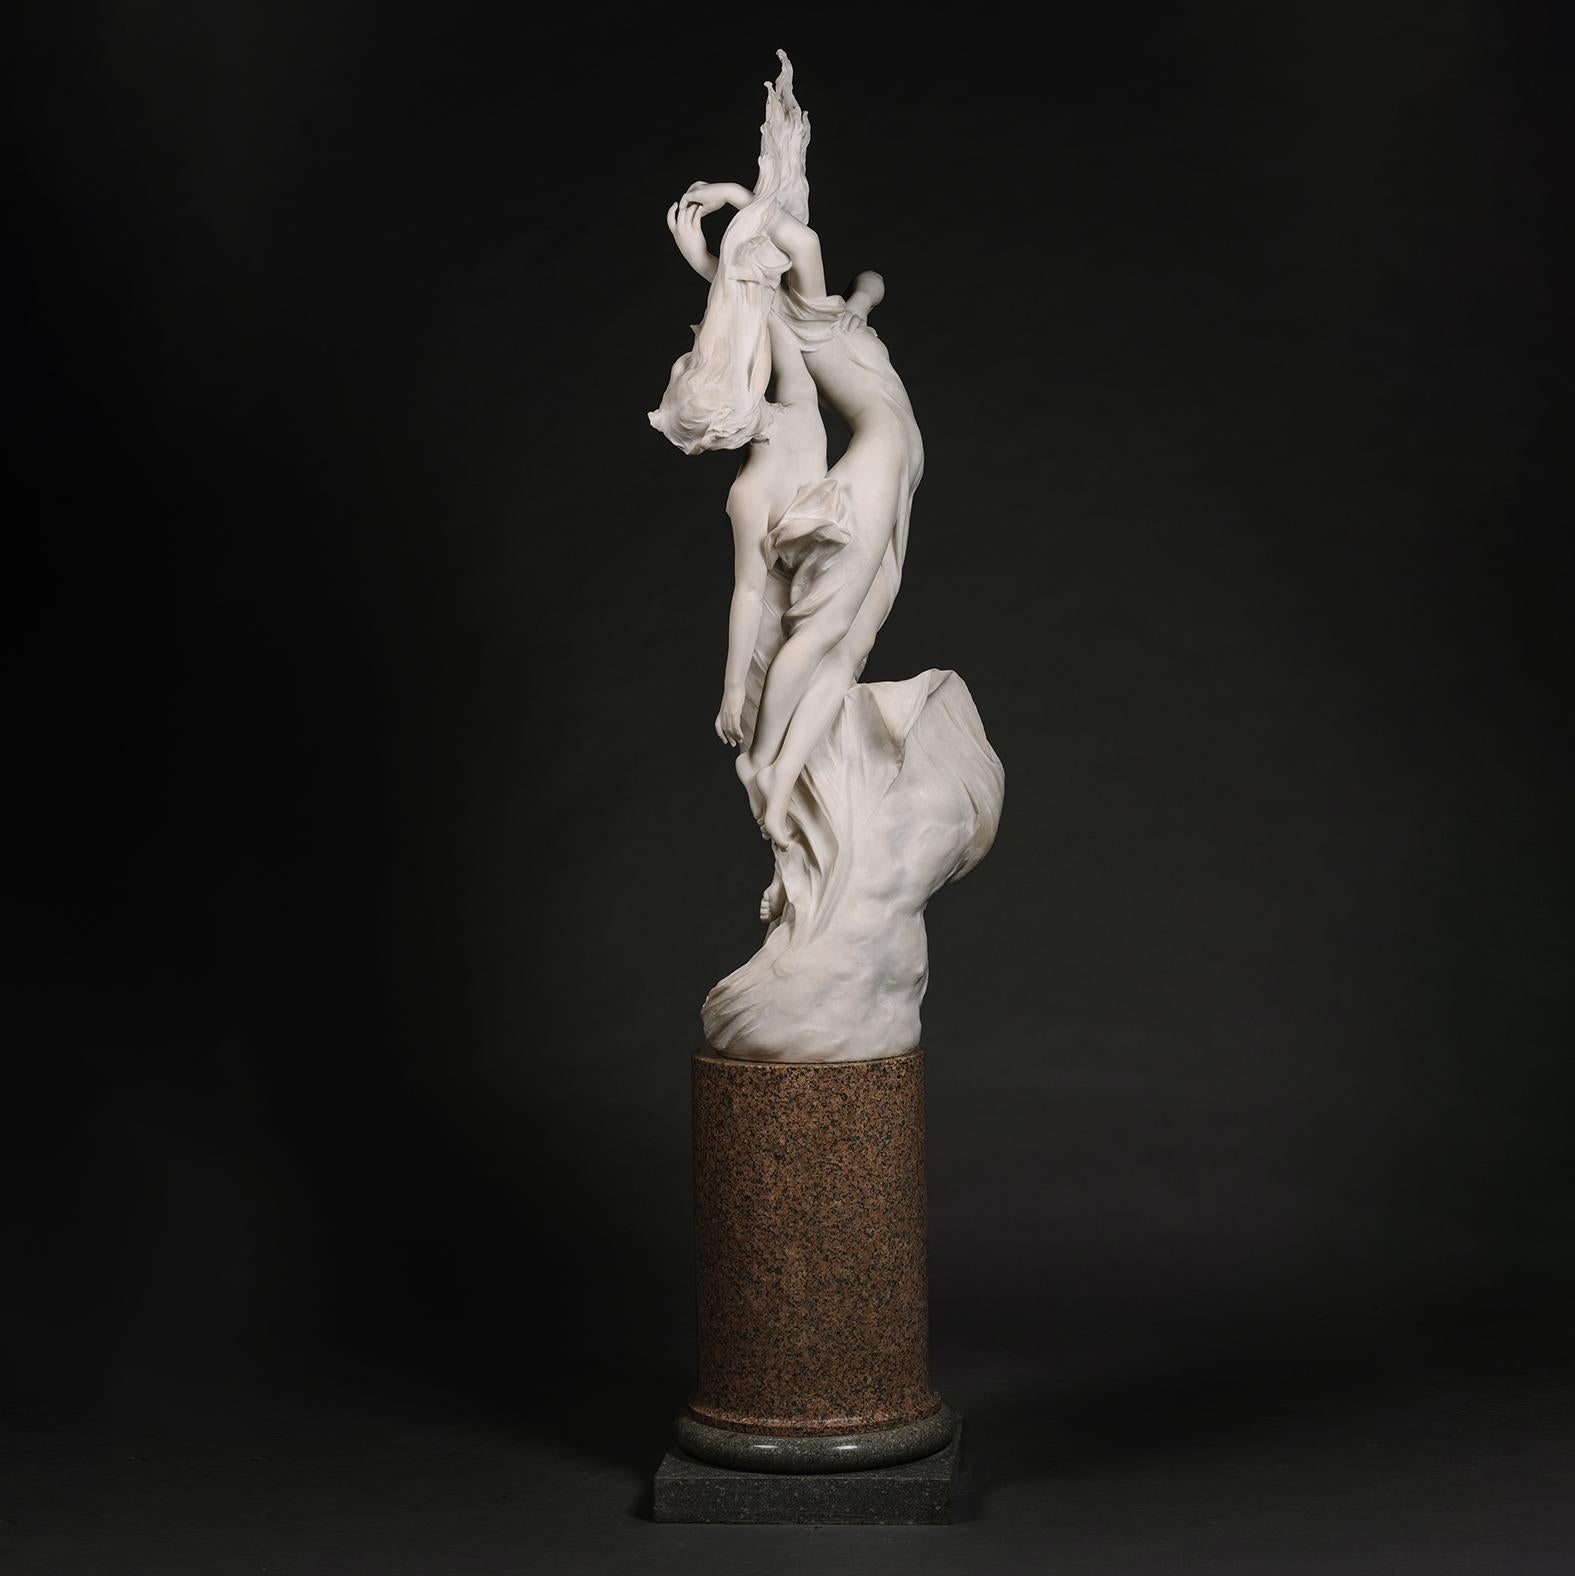 ‘Stelle Cadenti’ (‘Falling Stars’) By Vittorio Caradossi (Italian, 1861-1918) In Good Condition For Sale In Brighton, West Sussex